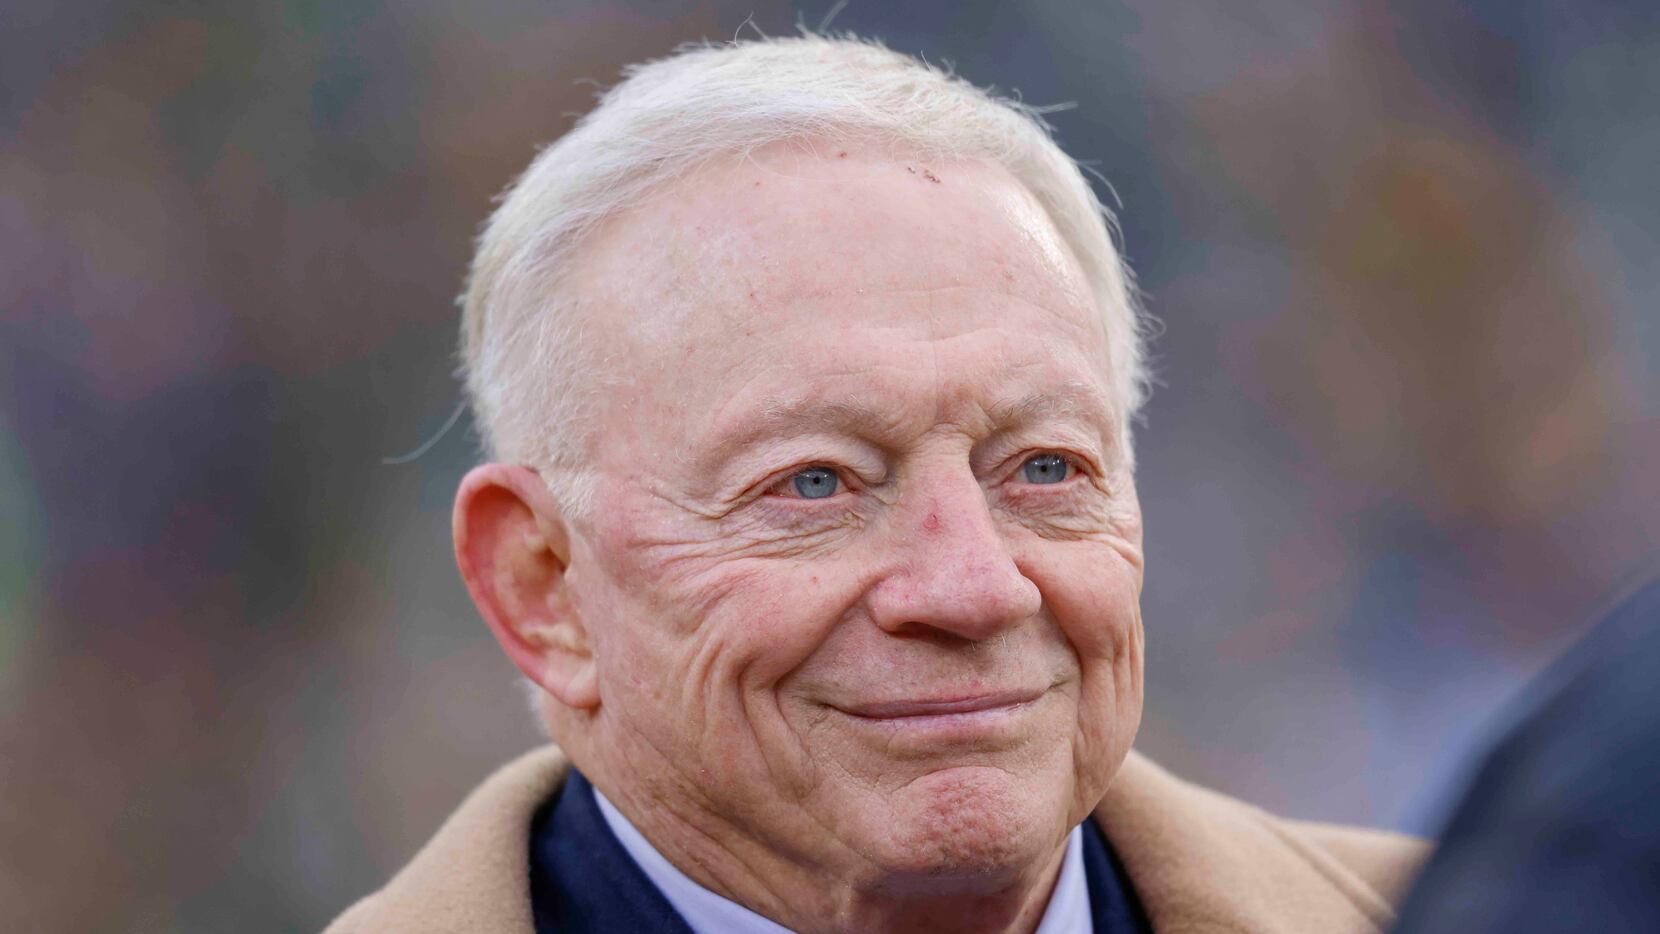 Cowboys' Jerry Jones reacts to Eagles' first loss of season, CeeDee Lamb's  'best' game yet